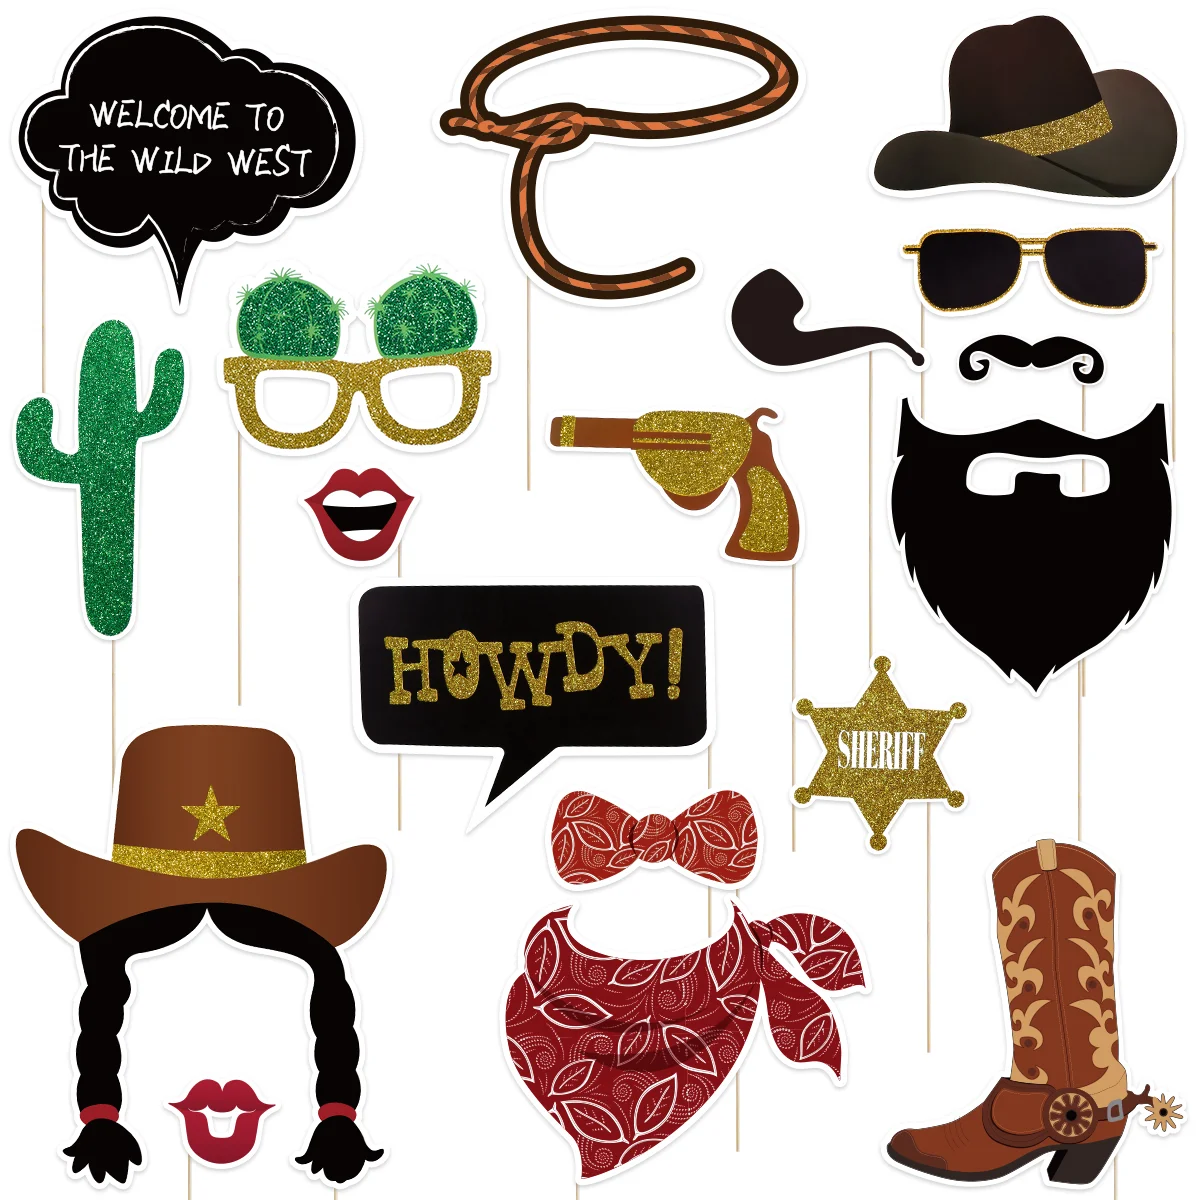 

Party Cowboy Photo Western Decorations Booth Props West Accessory Decoration Supplieswild Selfie Favors Funny Theme Cowgirl